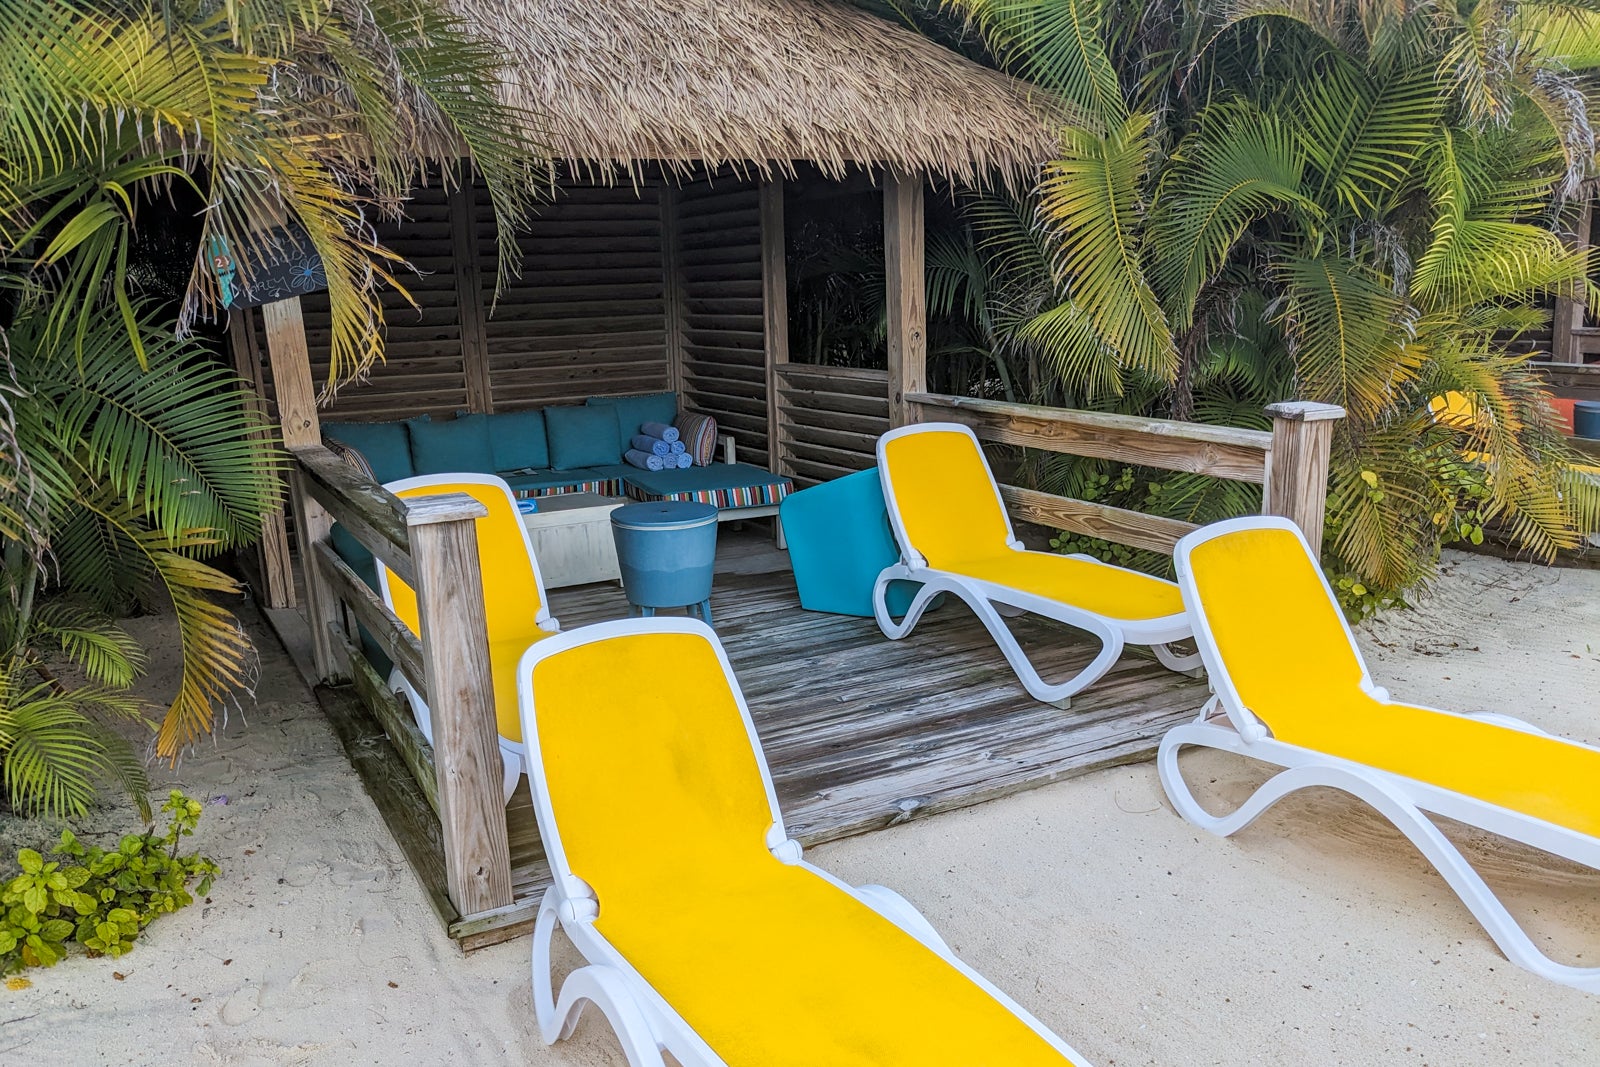 Thatched roof cabana with a couch inside and yellow lounge chairs in front